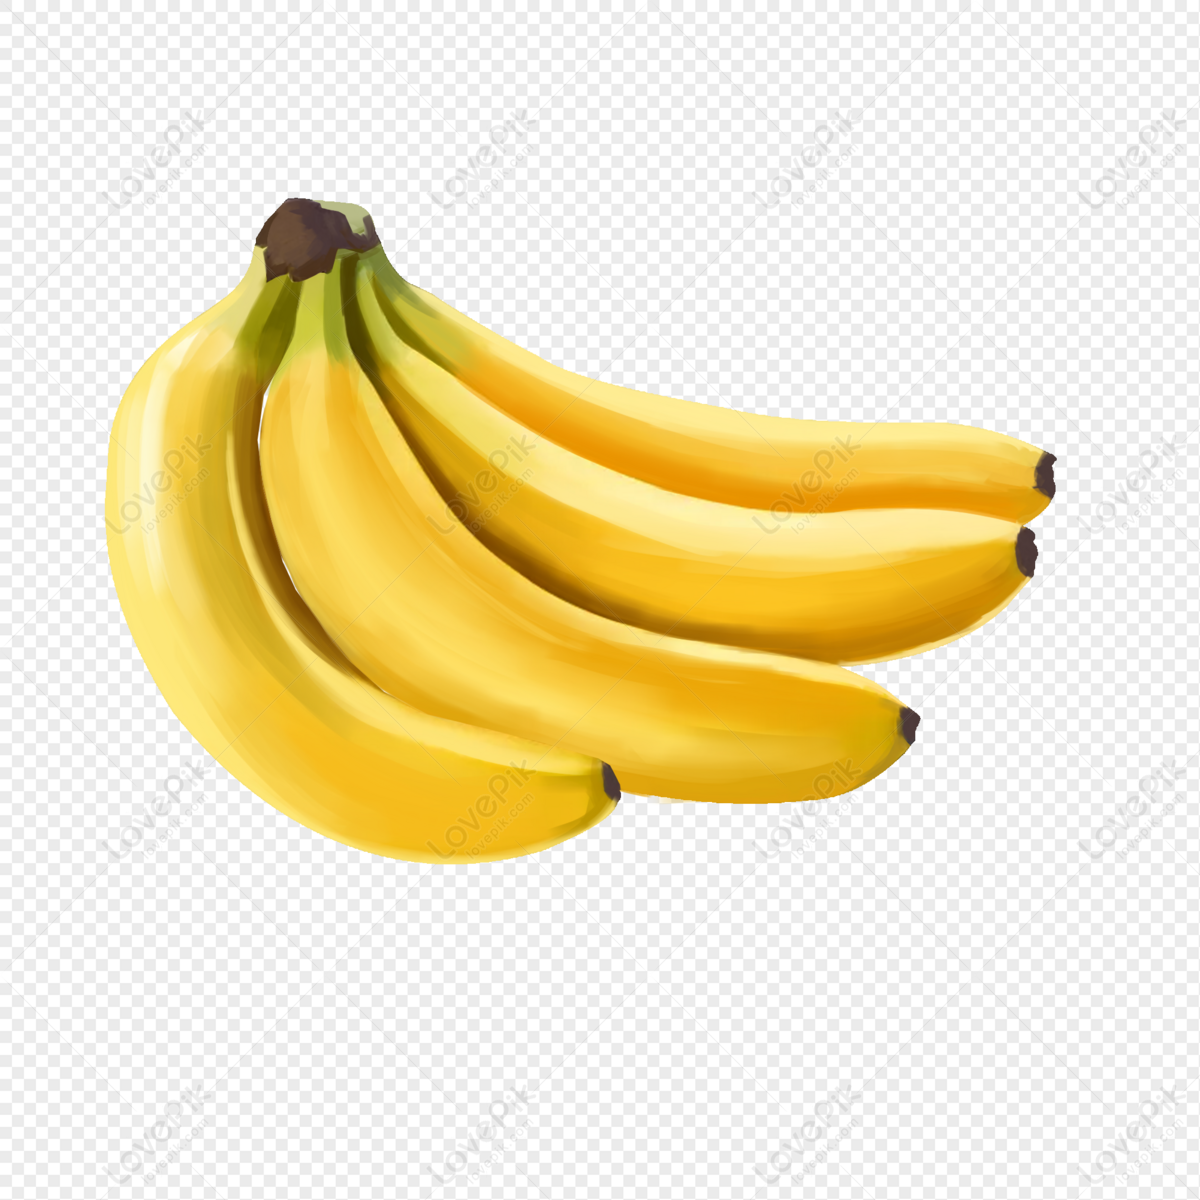 Banana PNG Transparent Background And Clipart Image For Free Download -  Lovepik | 401551780